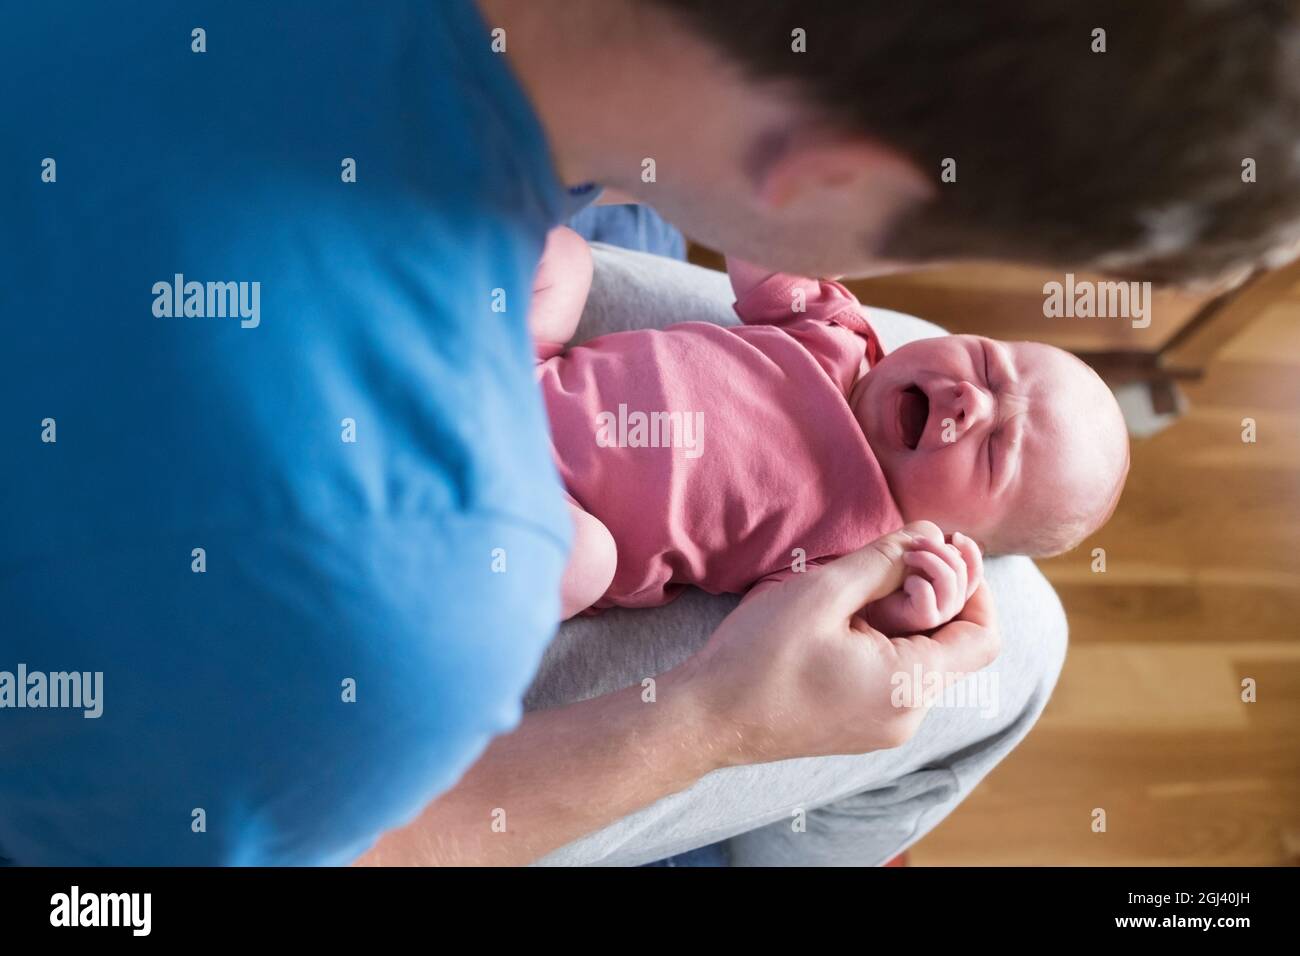 Little crying caucasian newborn baby suffering from colic pain Stock Photo